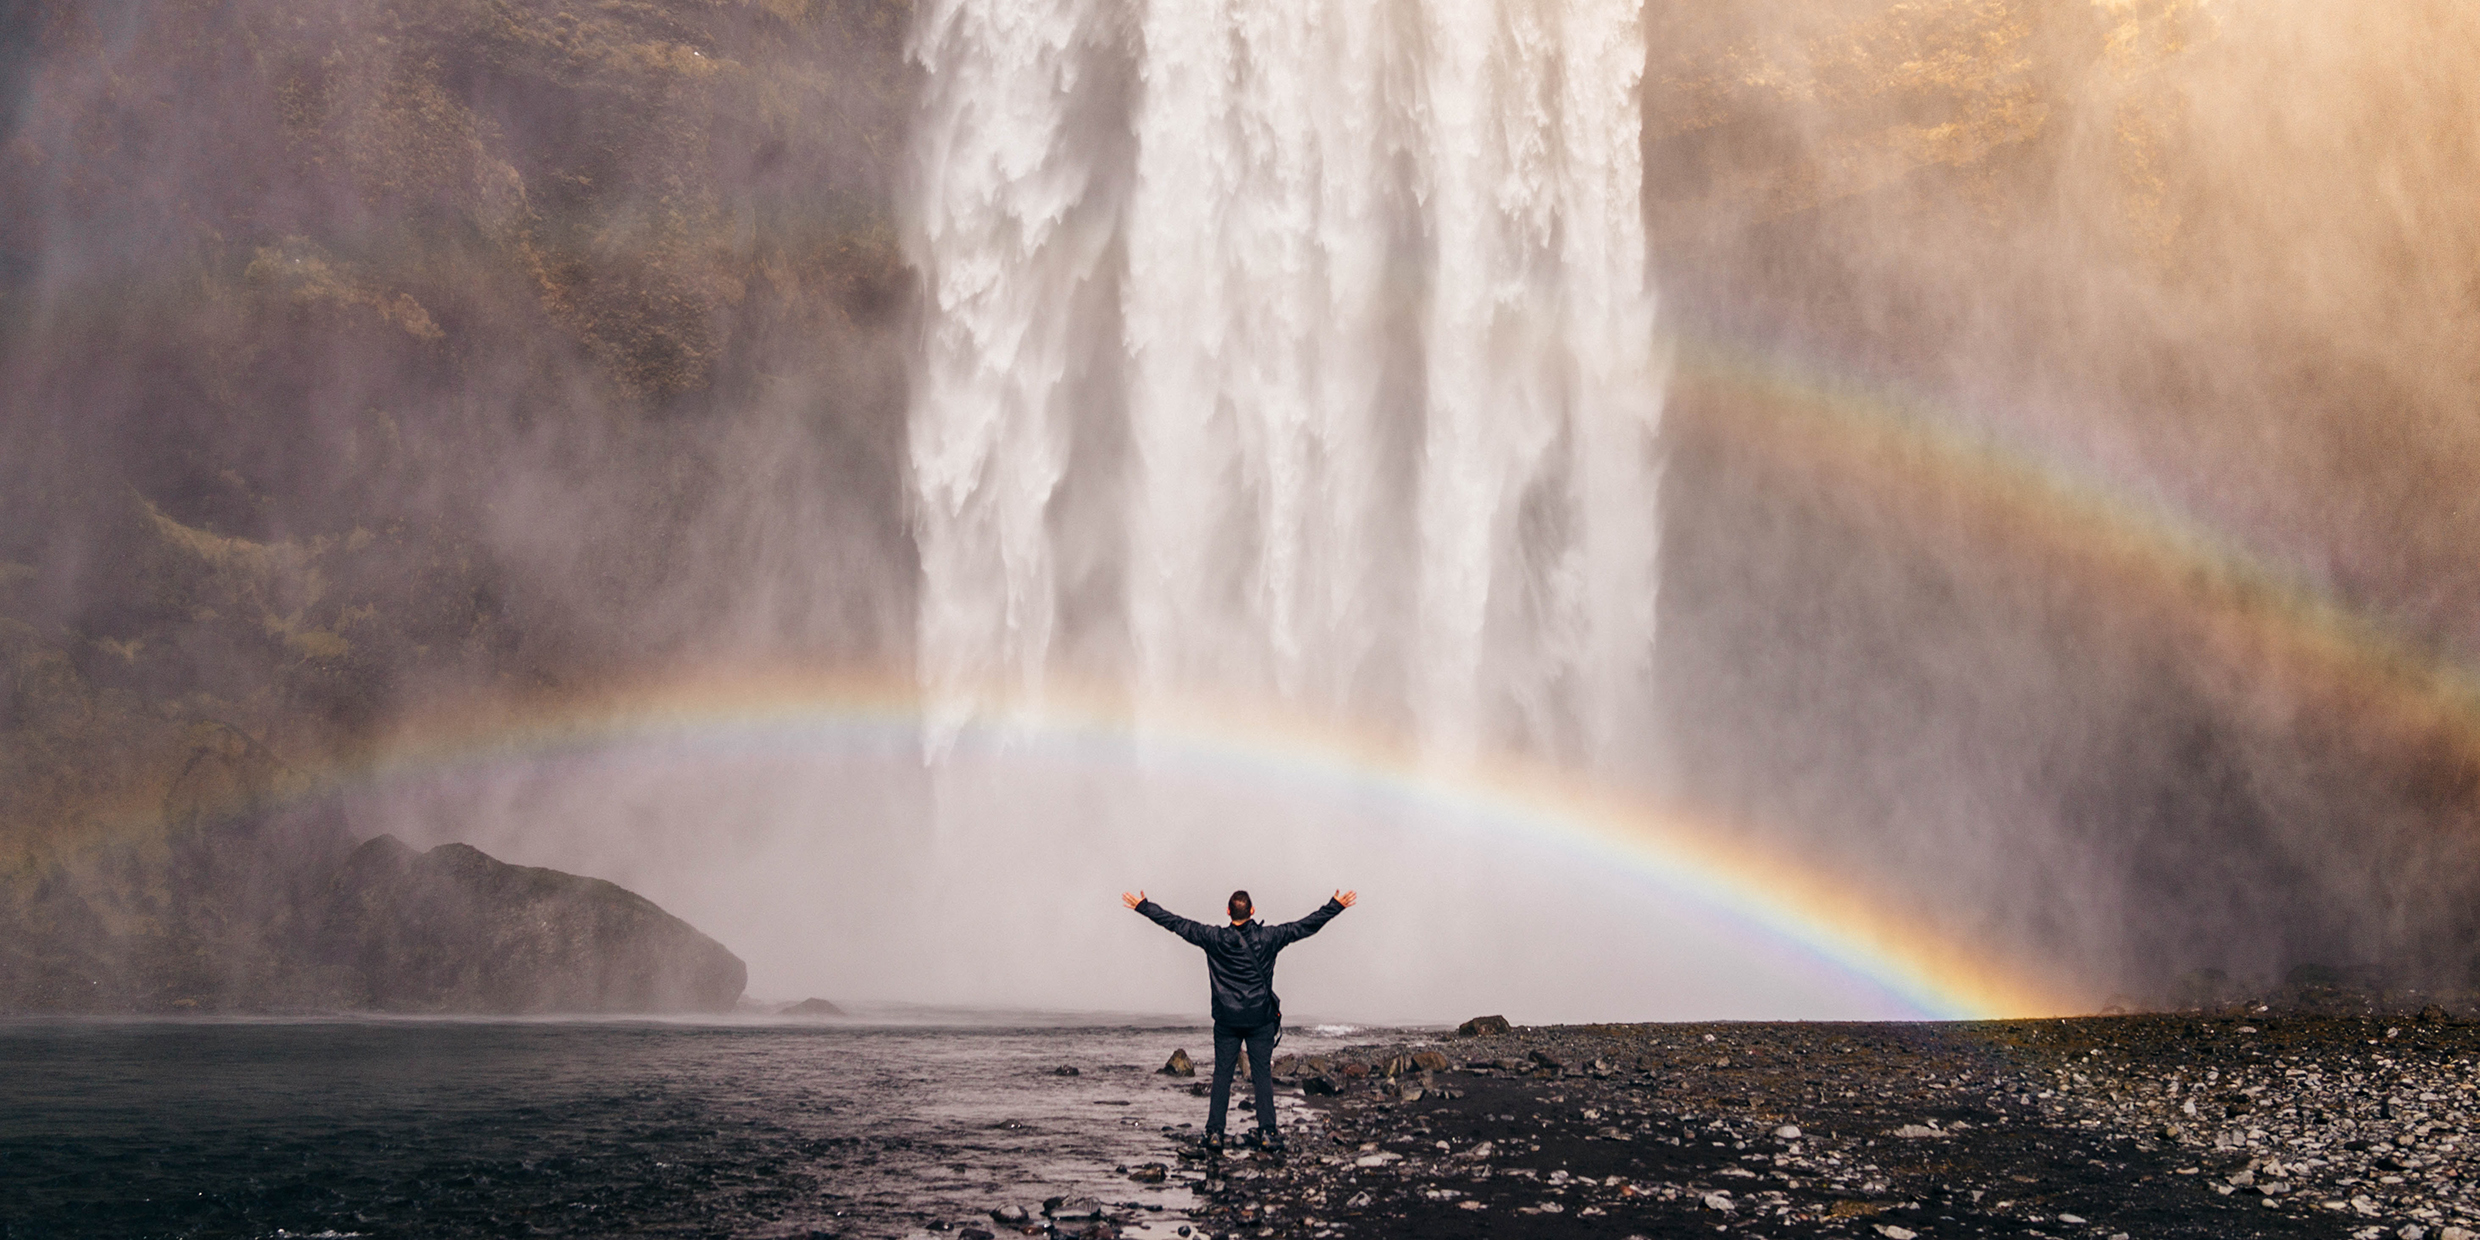 Image of man with outstretched arms in front of rainbow created by spray of waterfall